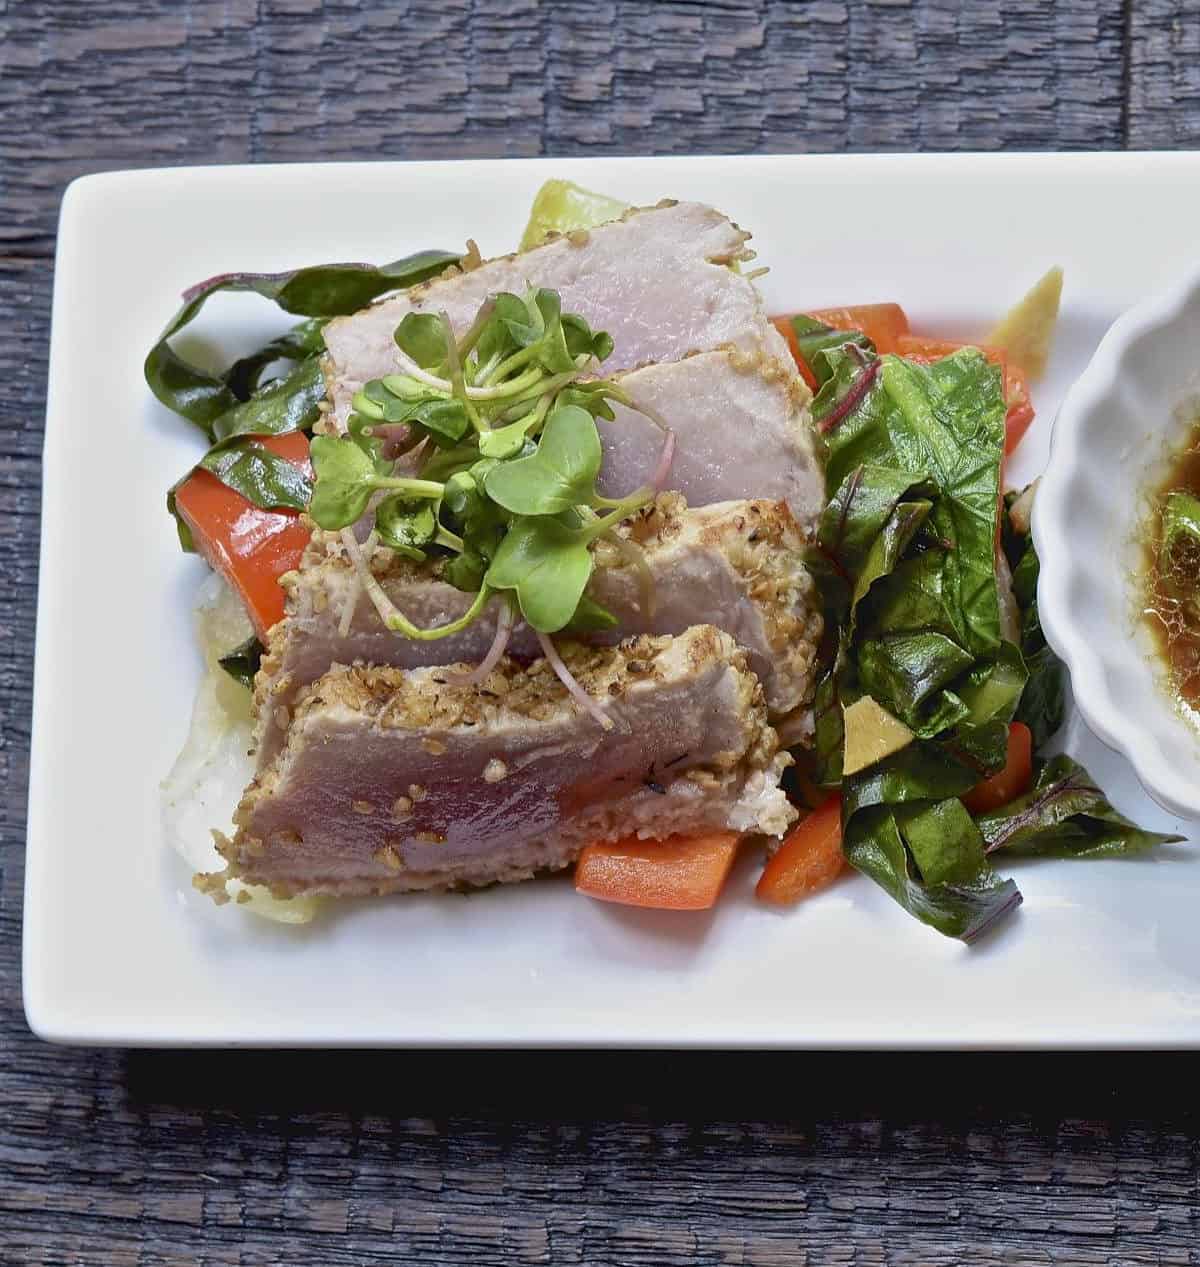  Ahi tuna that melts in your mouth with a crisp stir-fry.